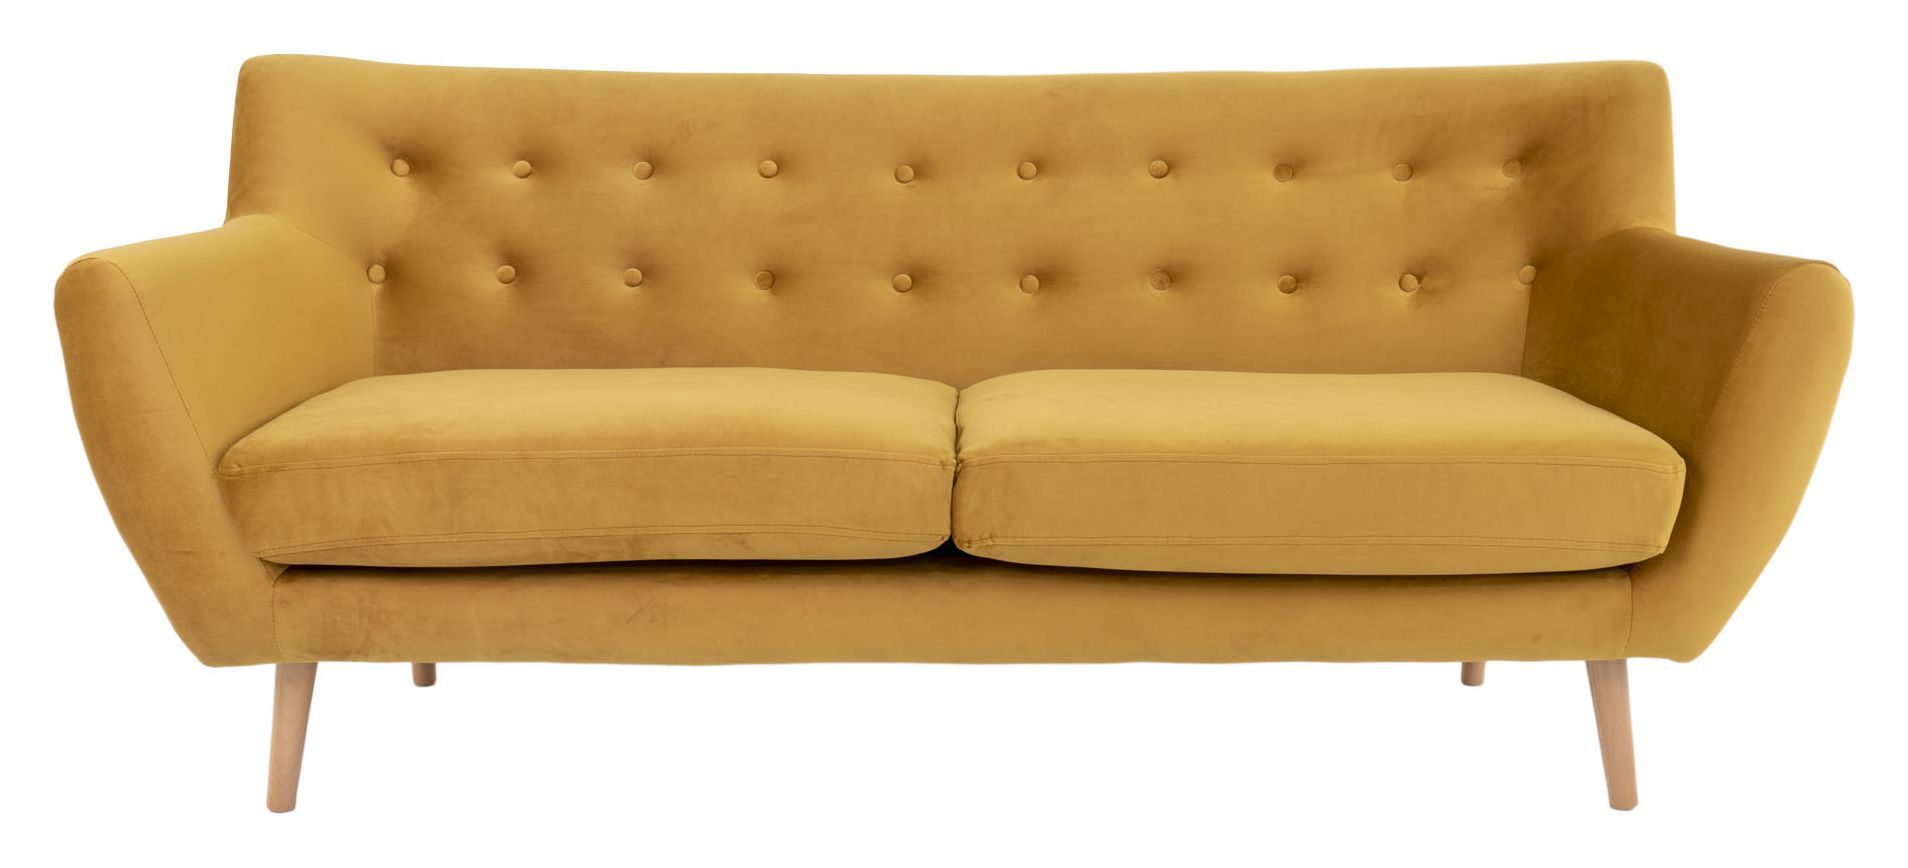 House Nordic Monte 3-pers, Sofa - Sennepsgul Velour   Unoliving